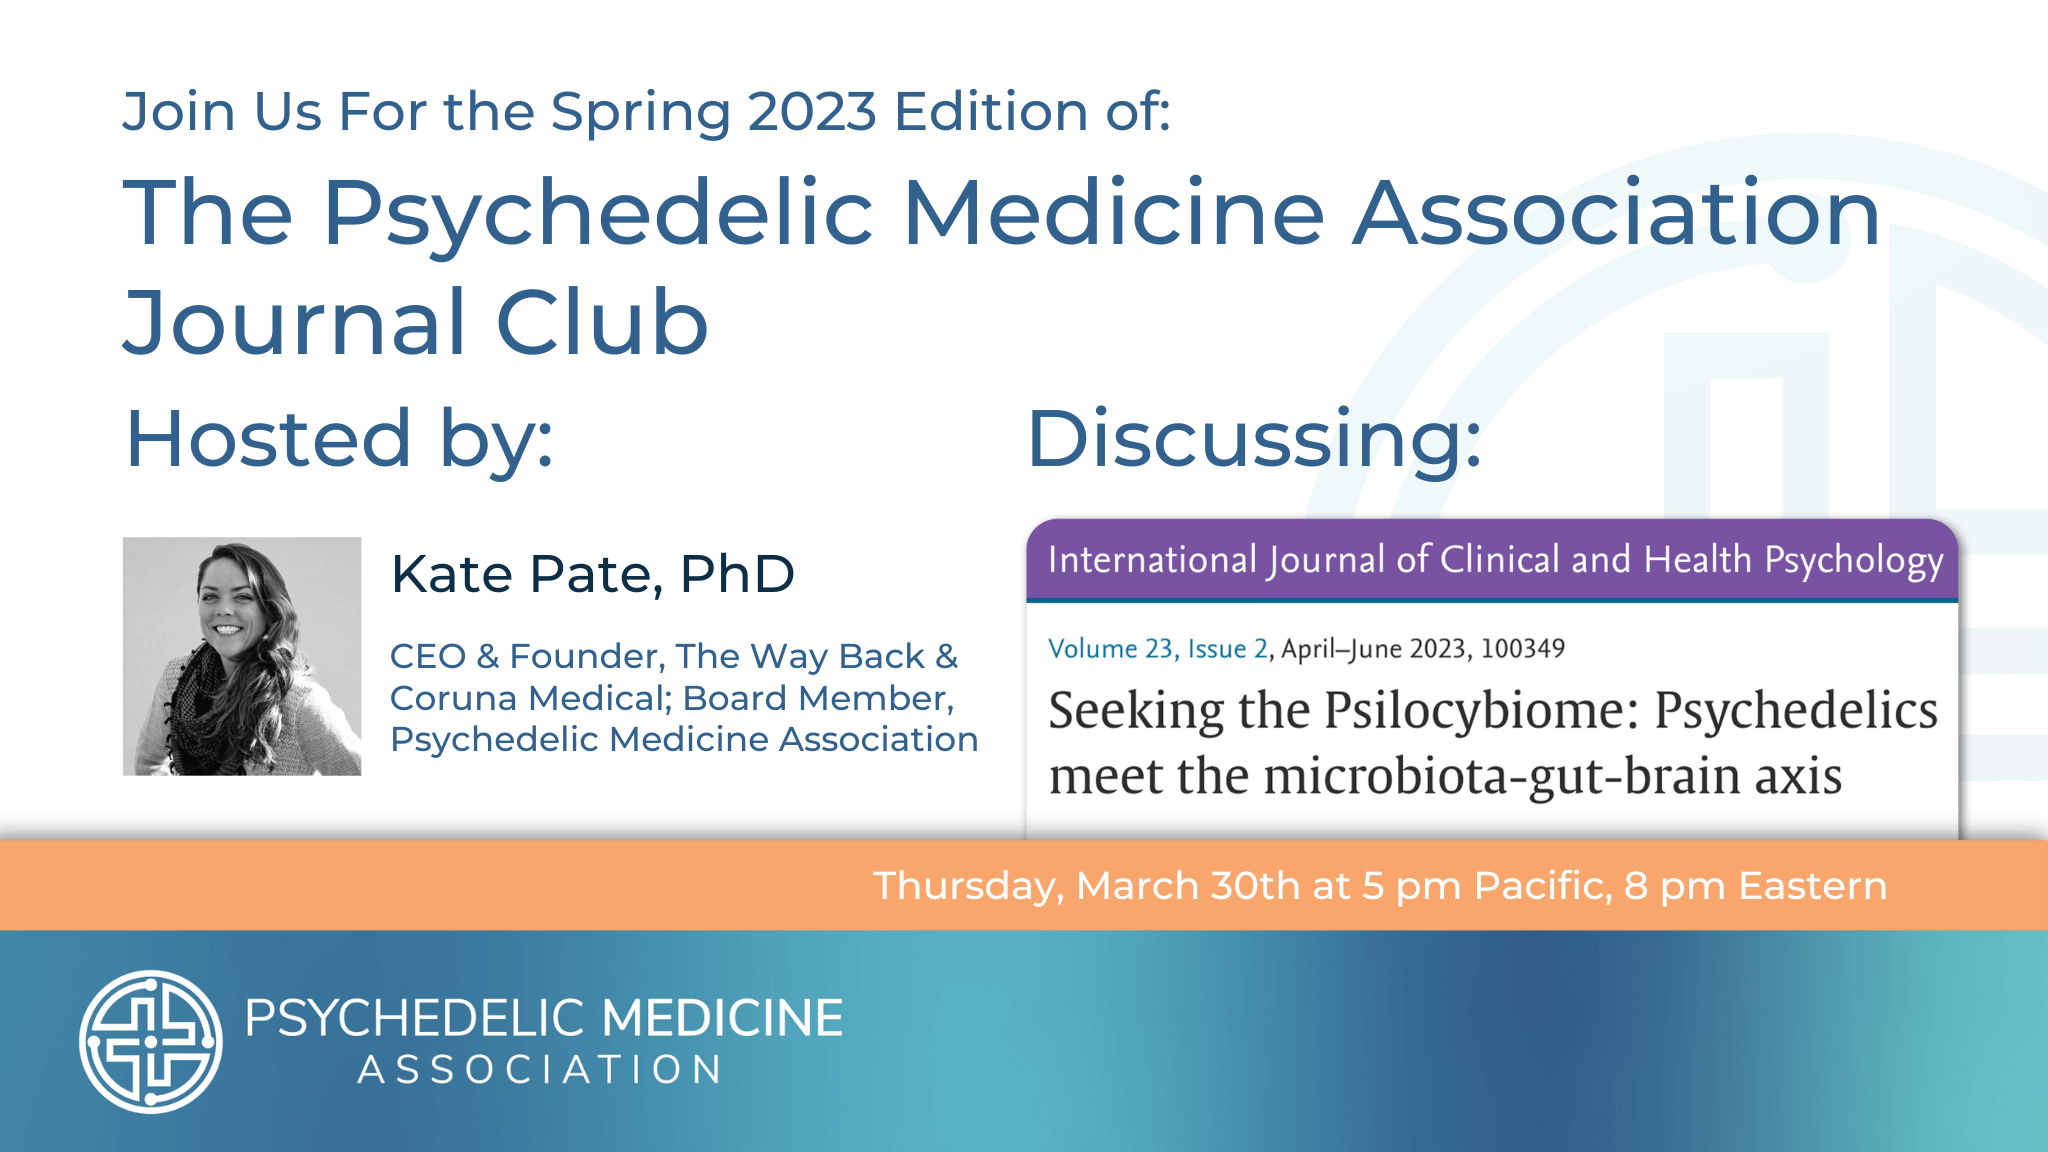 The Spring 2023 Edition of the Psychedelic Medicine Association Journal Club, hosted by Kate Pate, PhD - reading Seeking the Psilocybiome: Psychedelics meet the microbiota-gut-brain axis